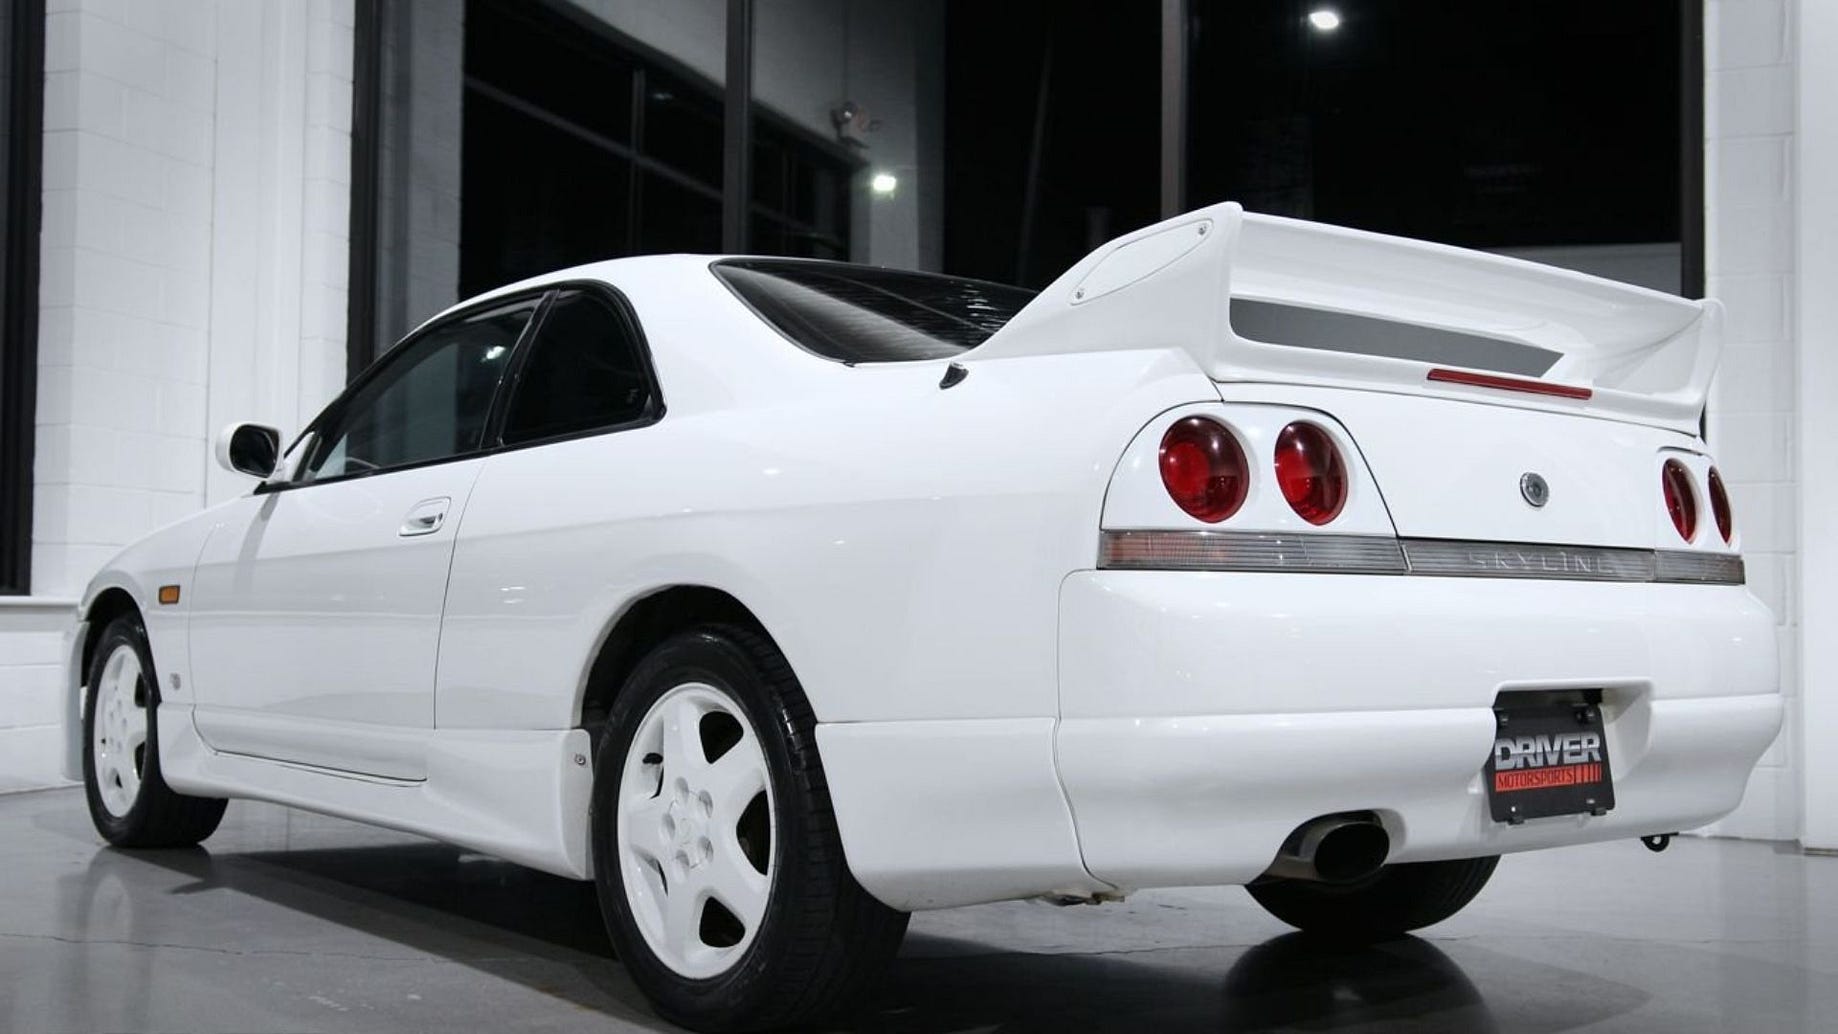 Enjoy Affordable Performance With A 1993 Nissan R33 Skyline Gts T By Sam Maven Motorious Medium